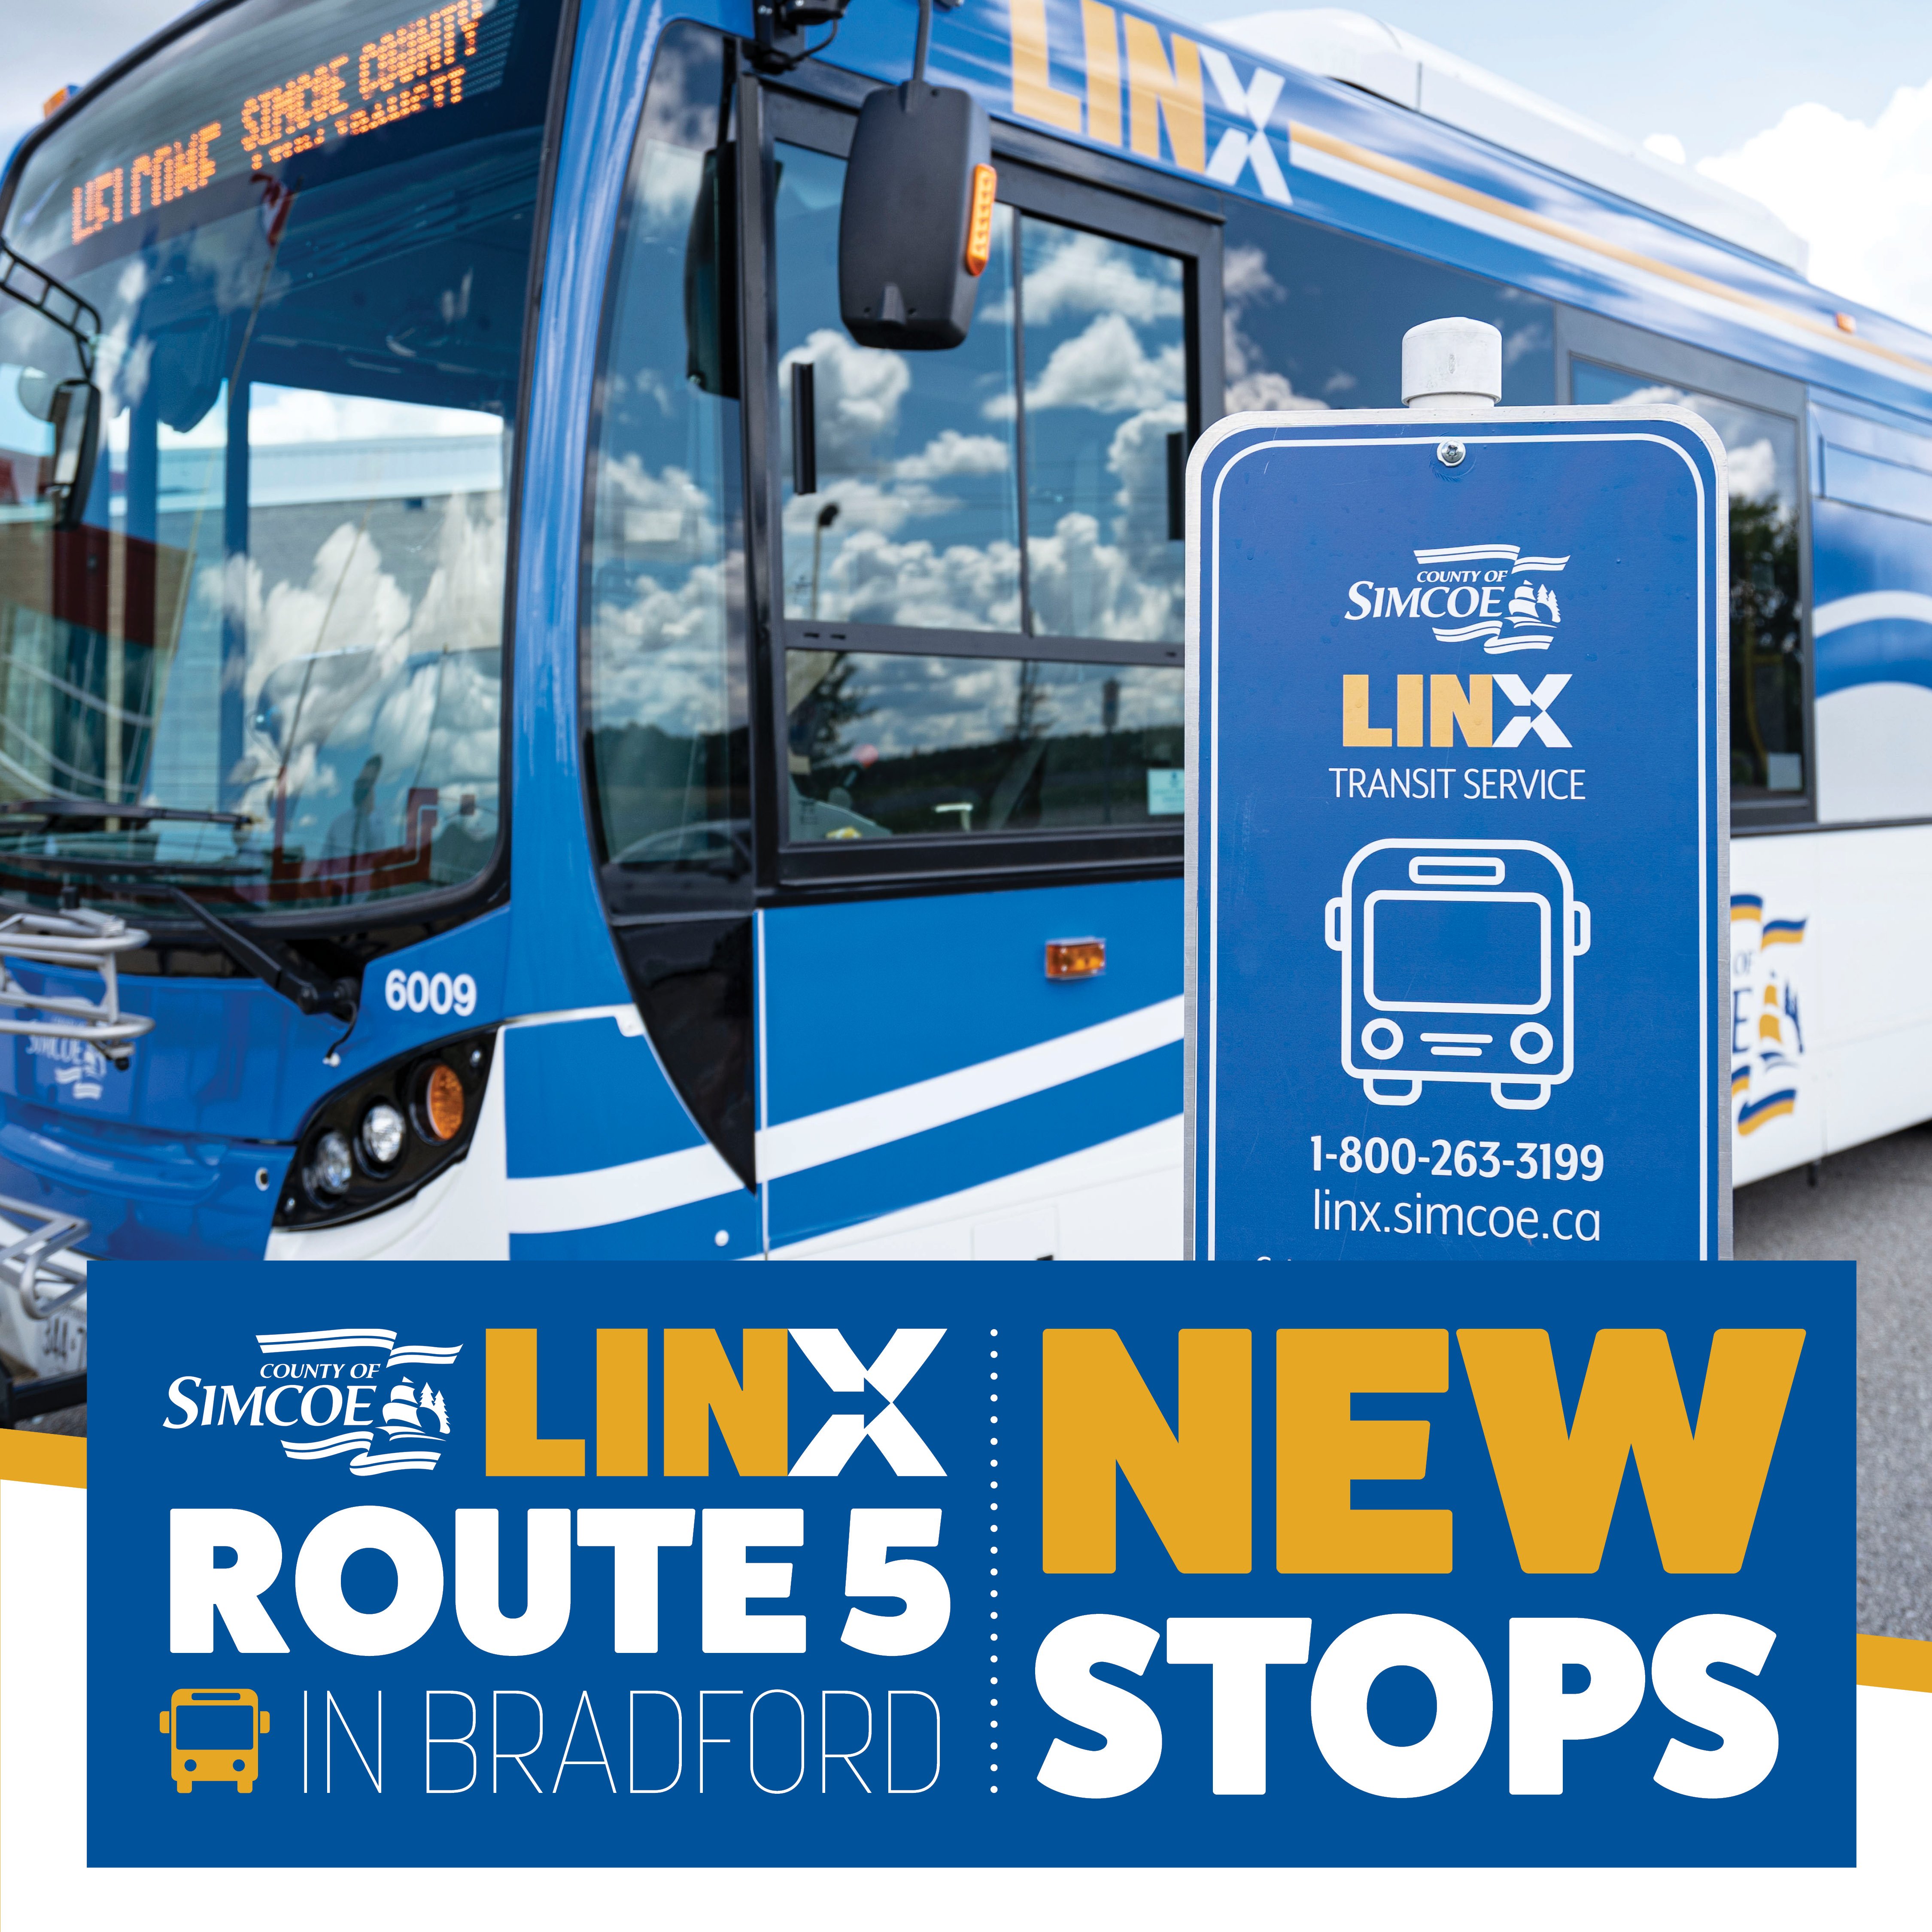 Image of LINX Transit bus with new route text